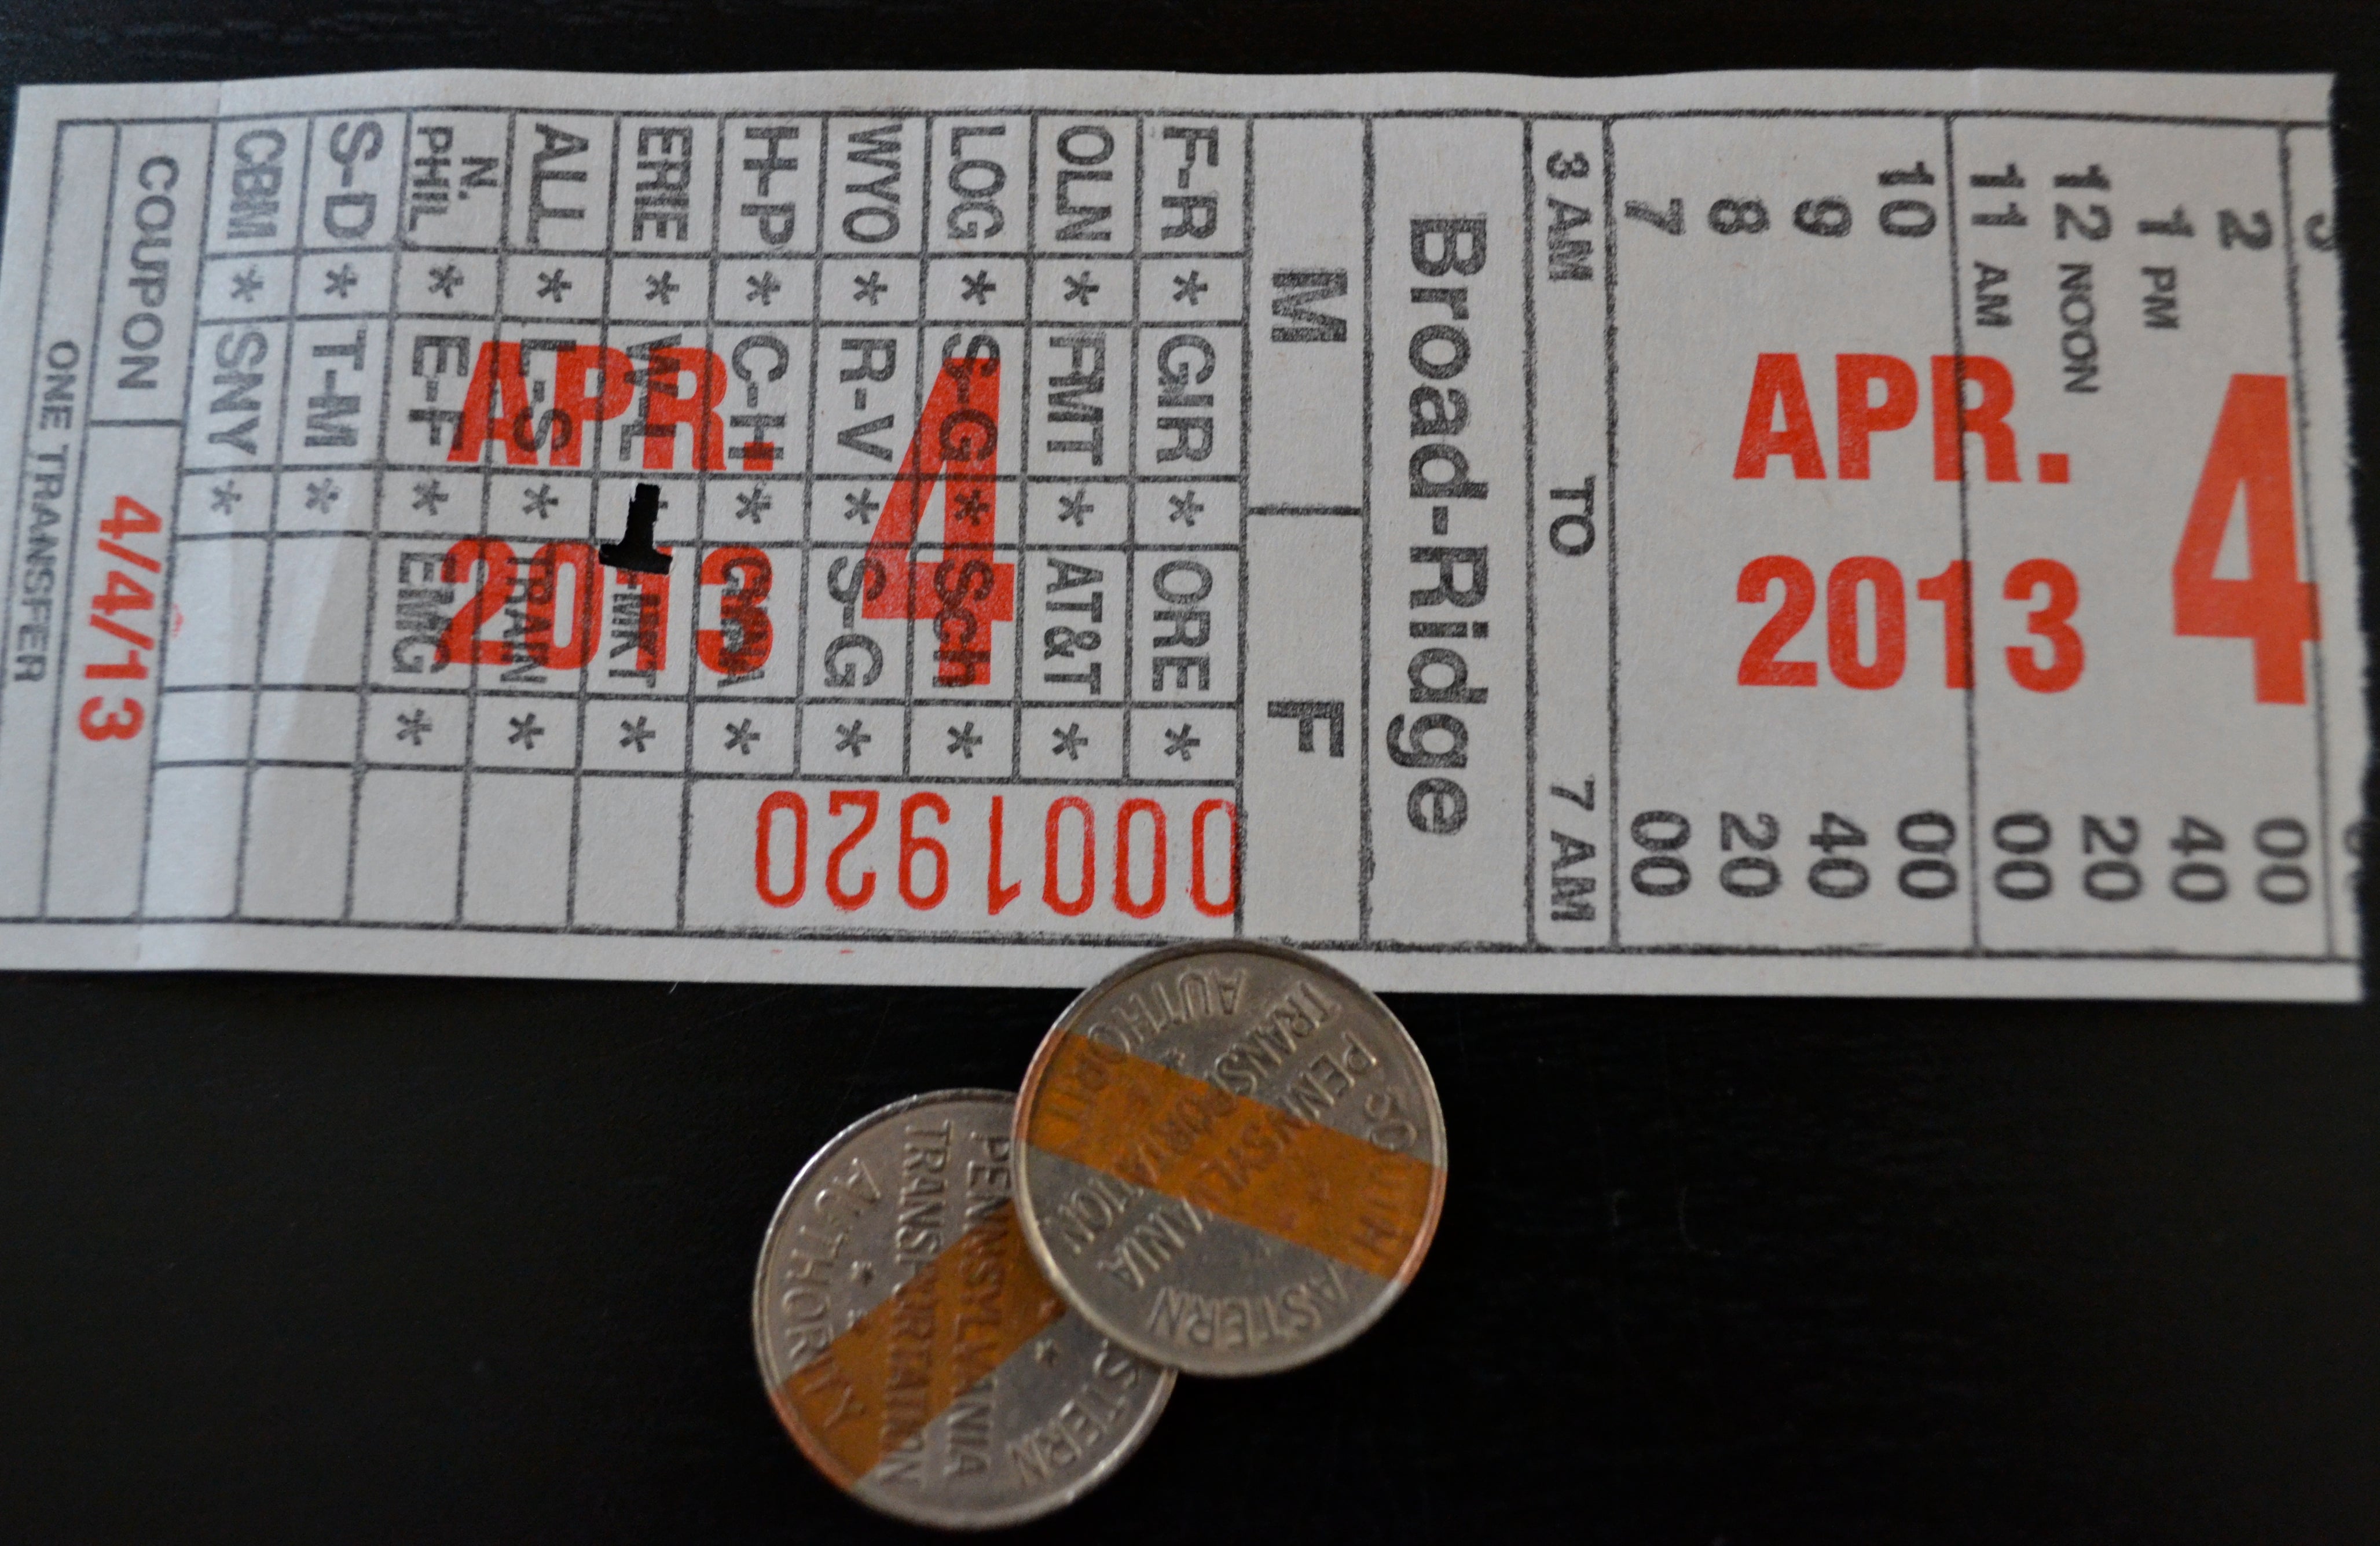 SEPTA is working to phase out tokens and paper transfers by mid 2014